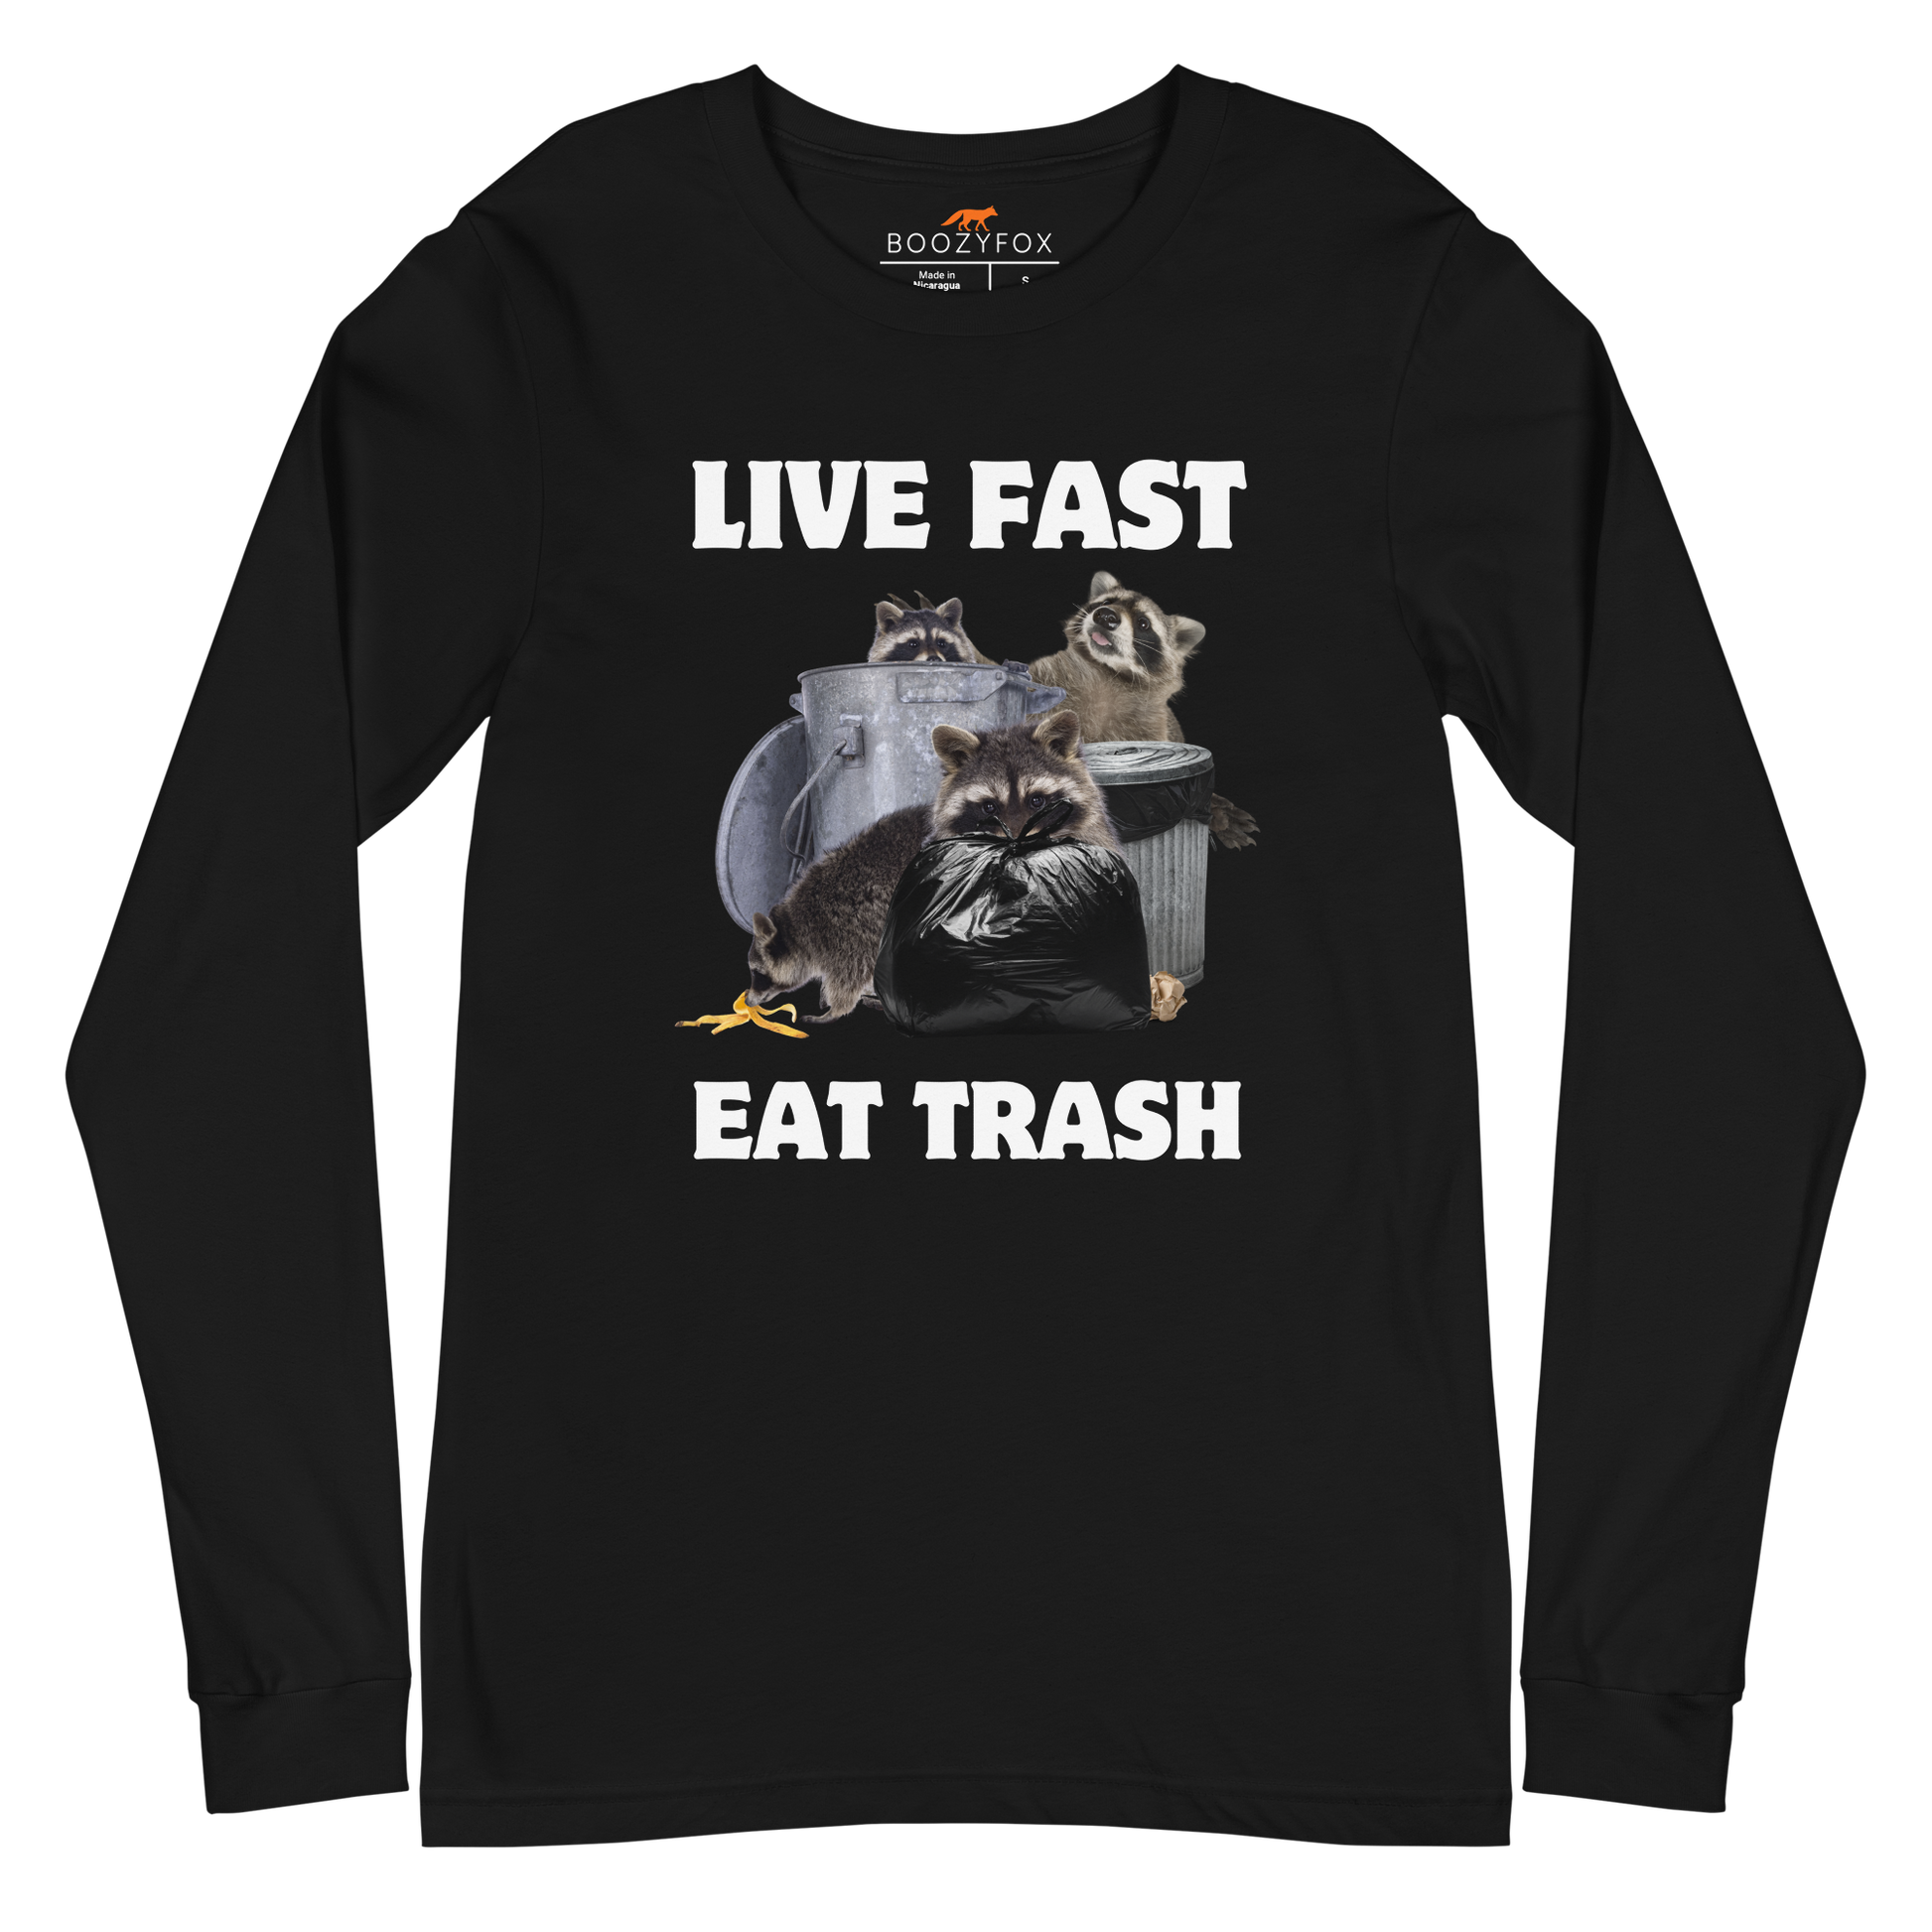 Black Raccoon Long Sleeve Tee featuring a funny Live Fast Eat Trash graphic on the chest - Funny Raccoon Long Sleeve Graphic Tees - Boozy Fox